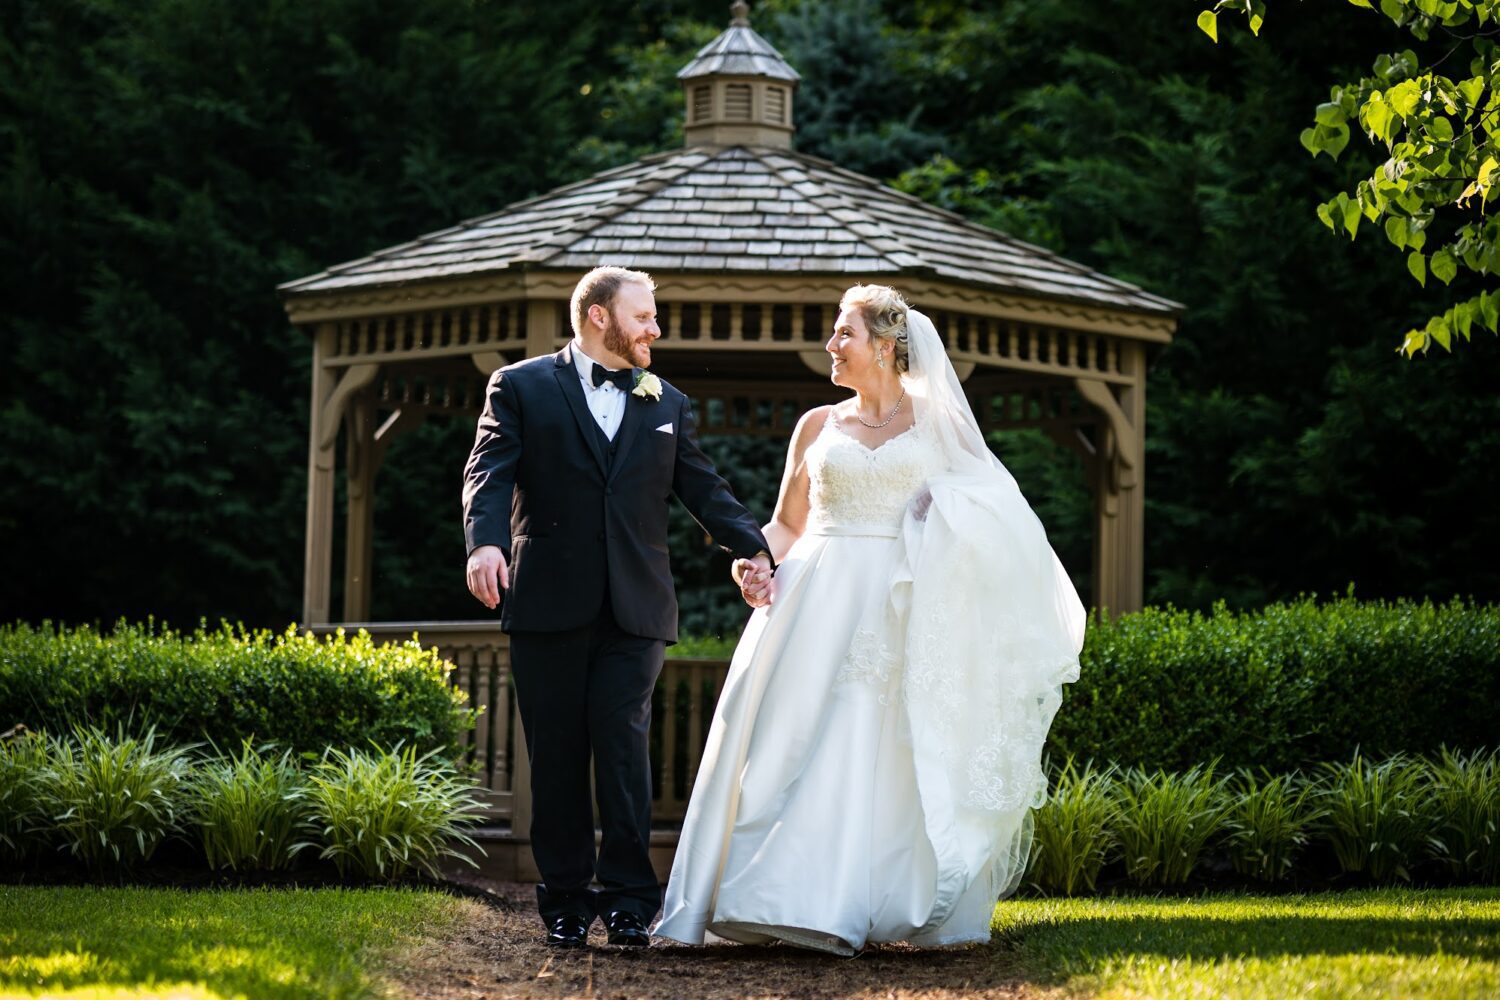 Newly wed couple standing infront of gazebo surrounded by green landscaping